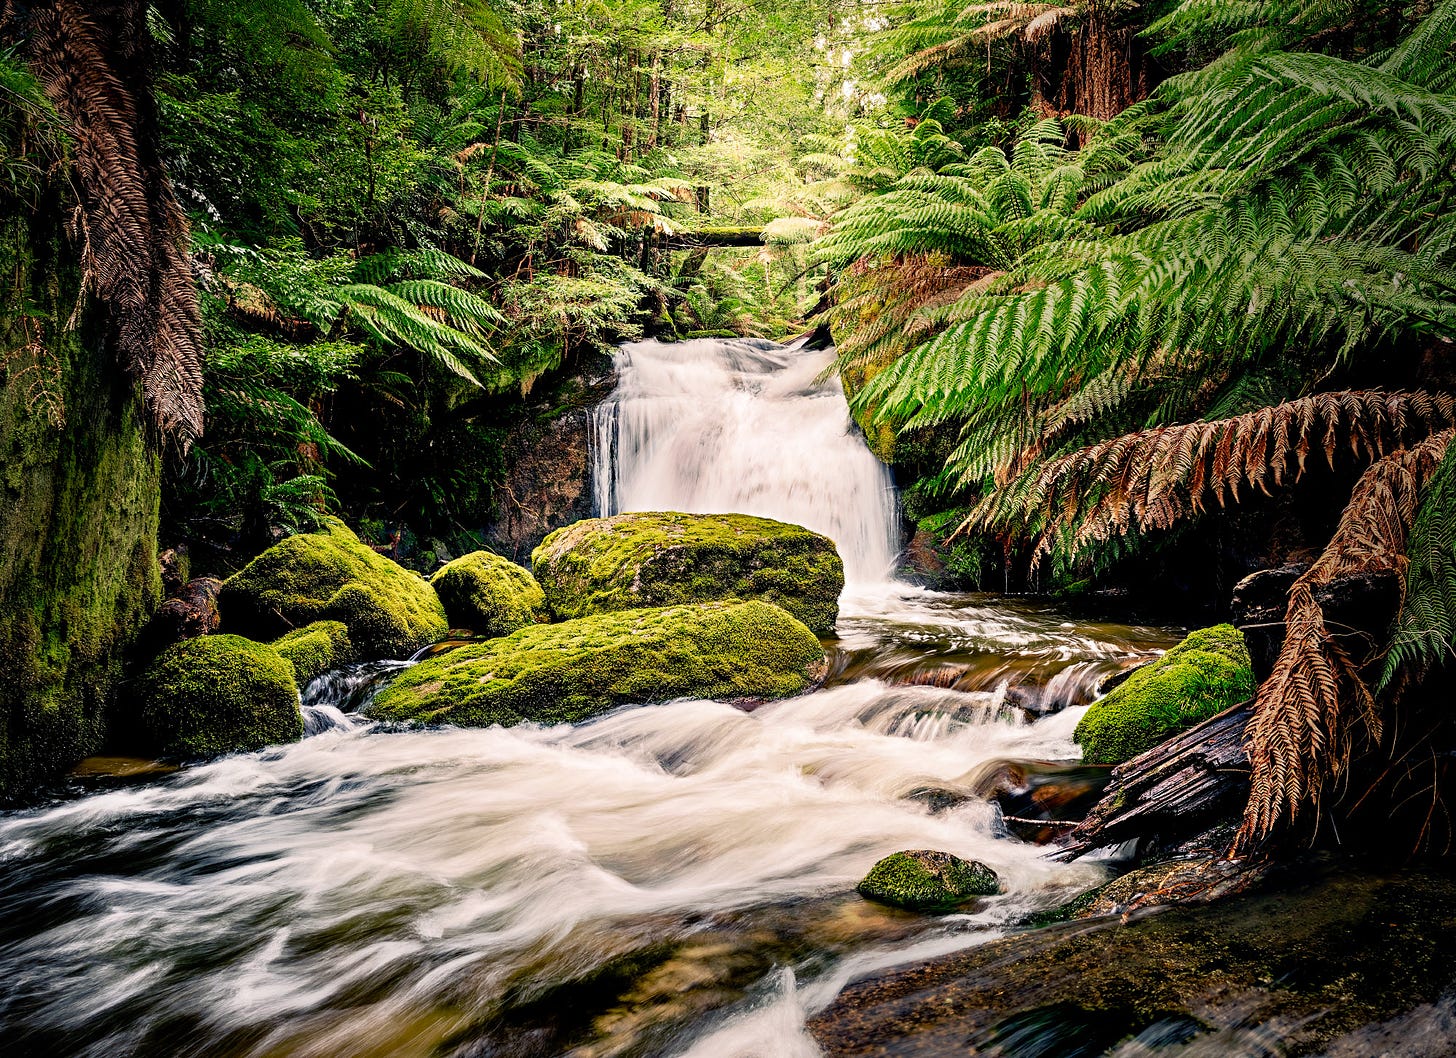 Unnamed waterfall found in Victoria's central highlands